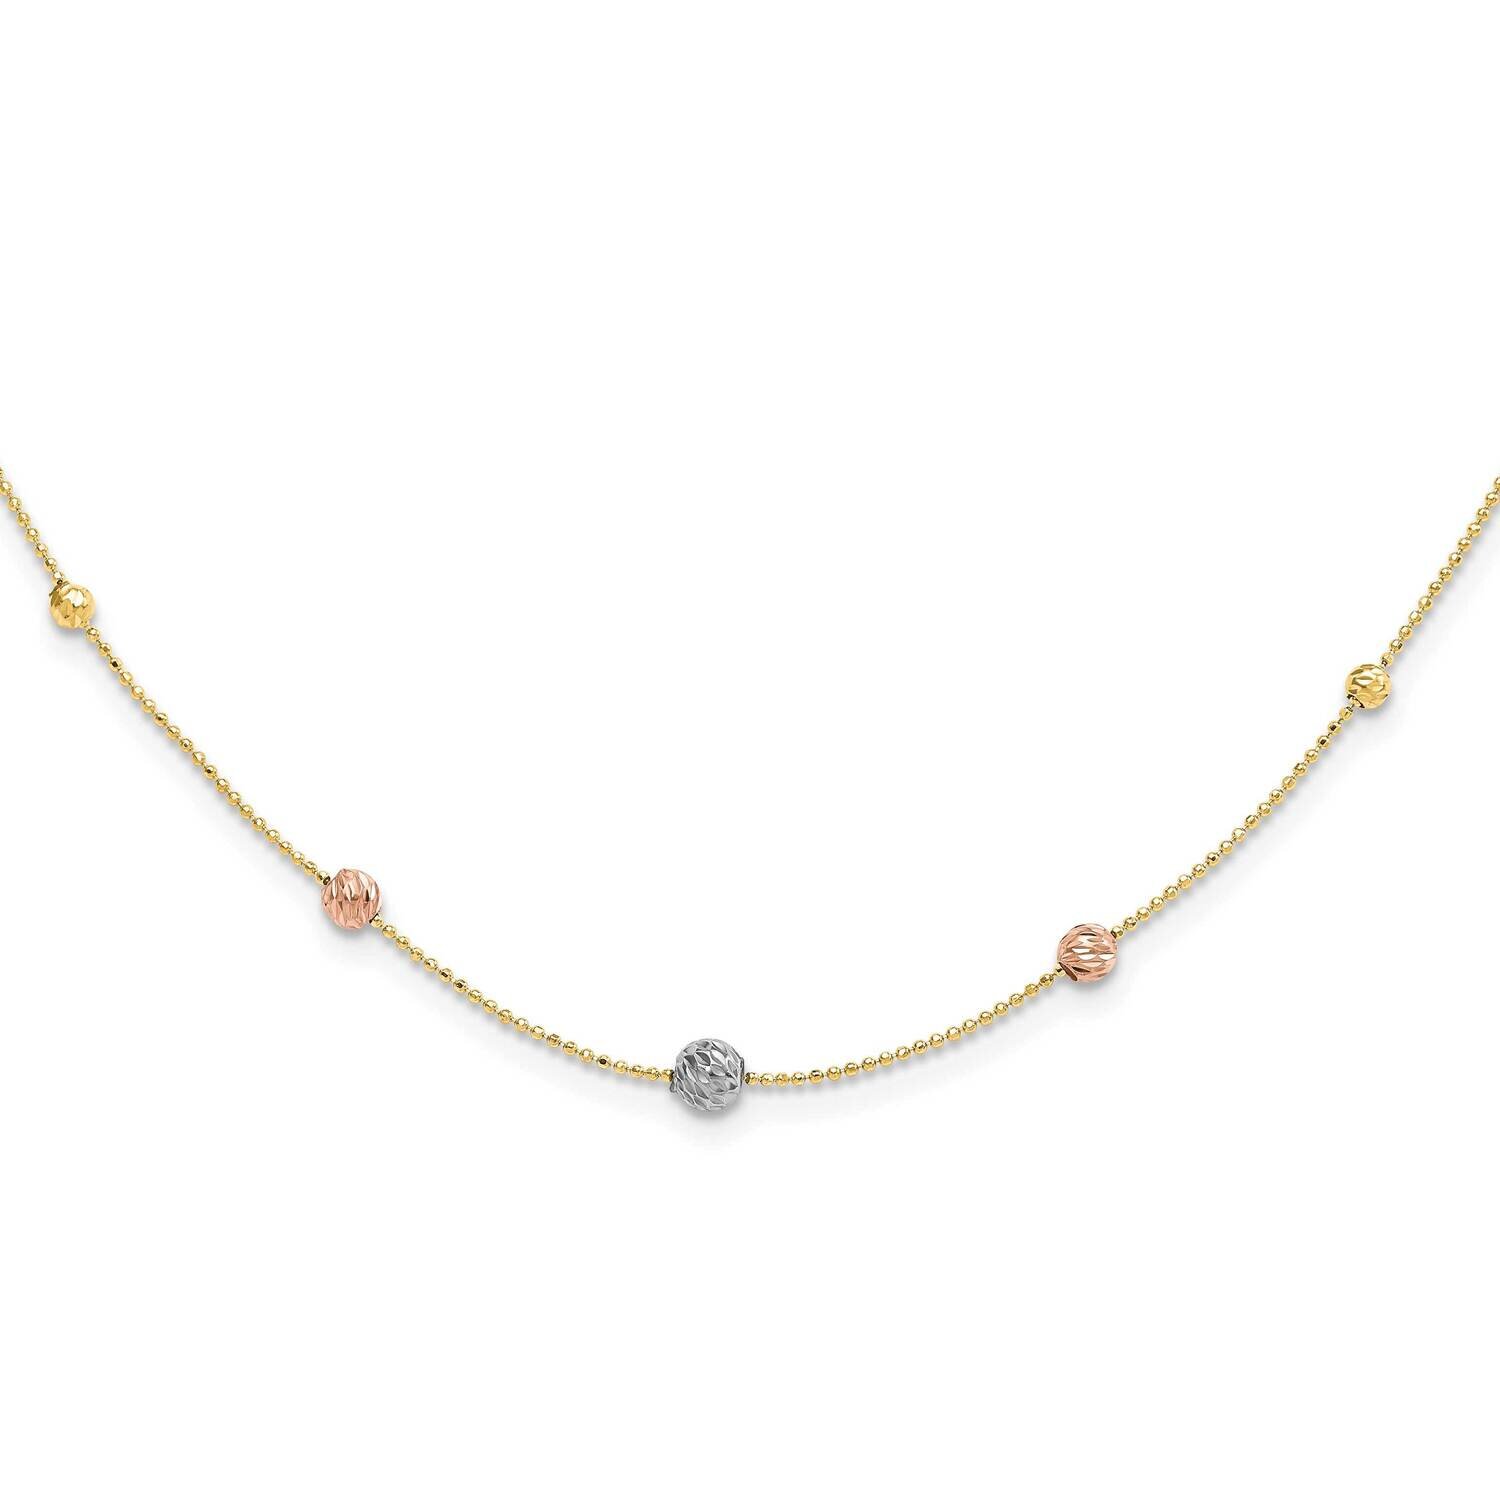 Diamond-Cut Beads Beaded Chain Necklace 18 Inch 14k Tri-Color Gold SF2863-18